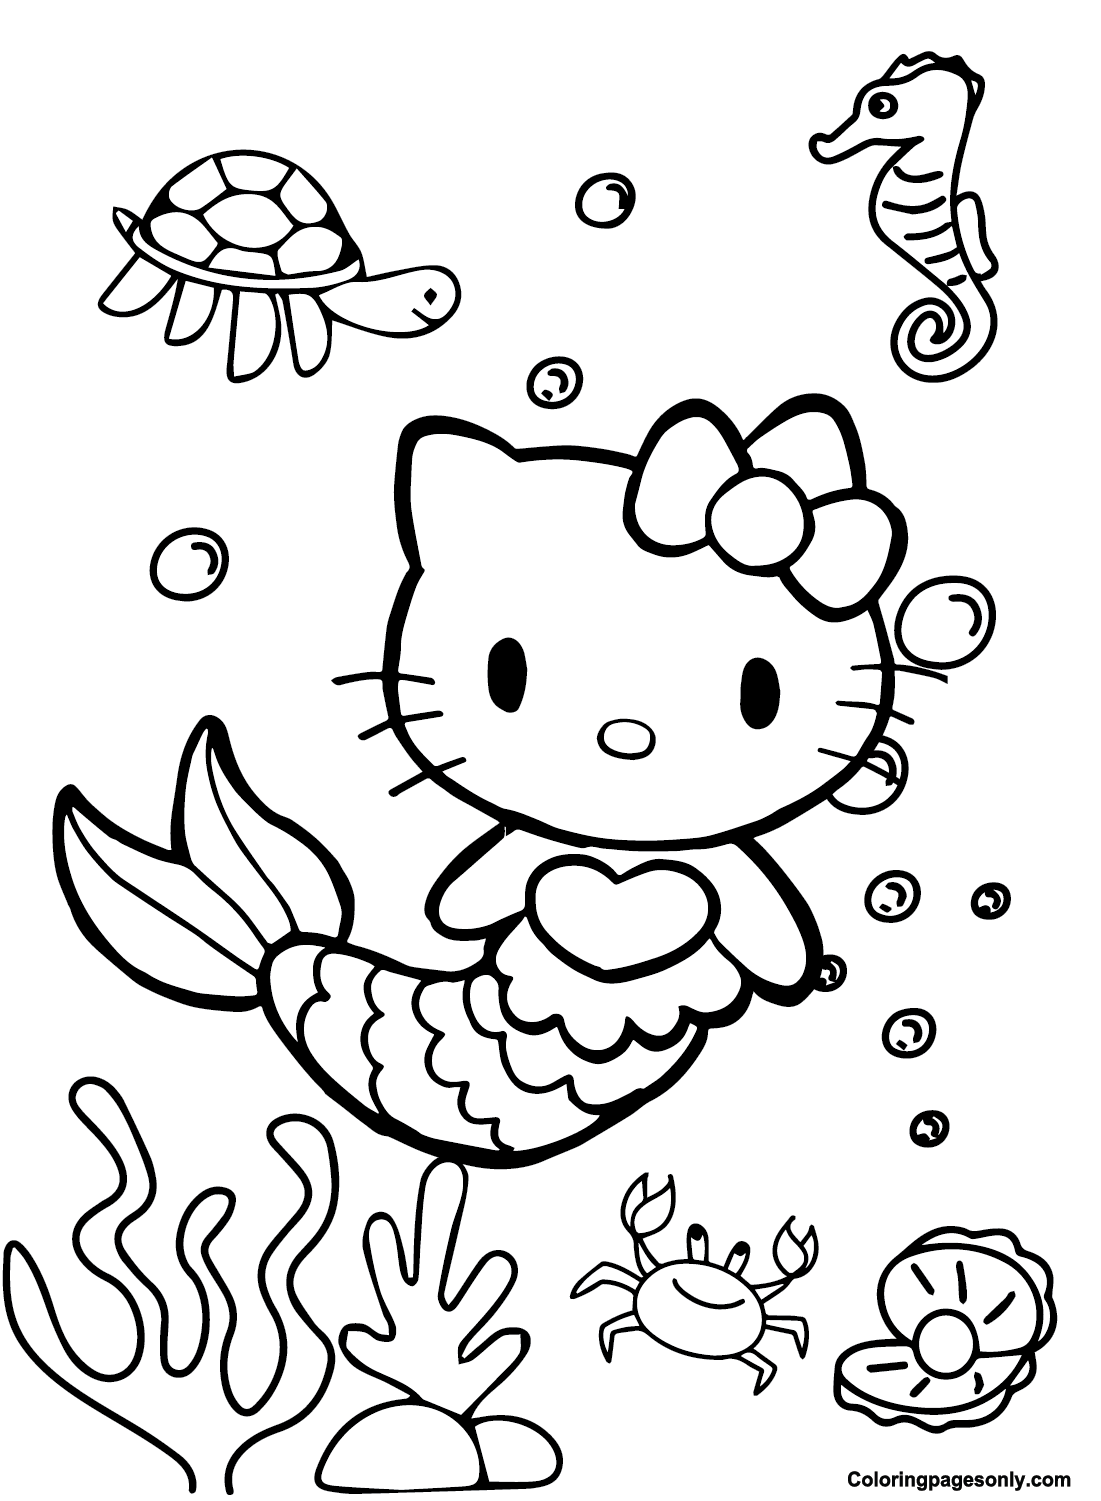 Cute Hello Kitty Mermaid Coloring Page